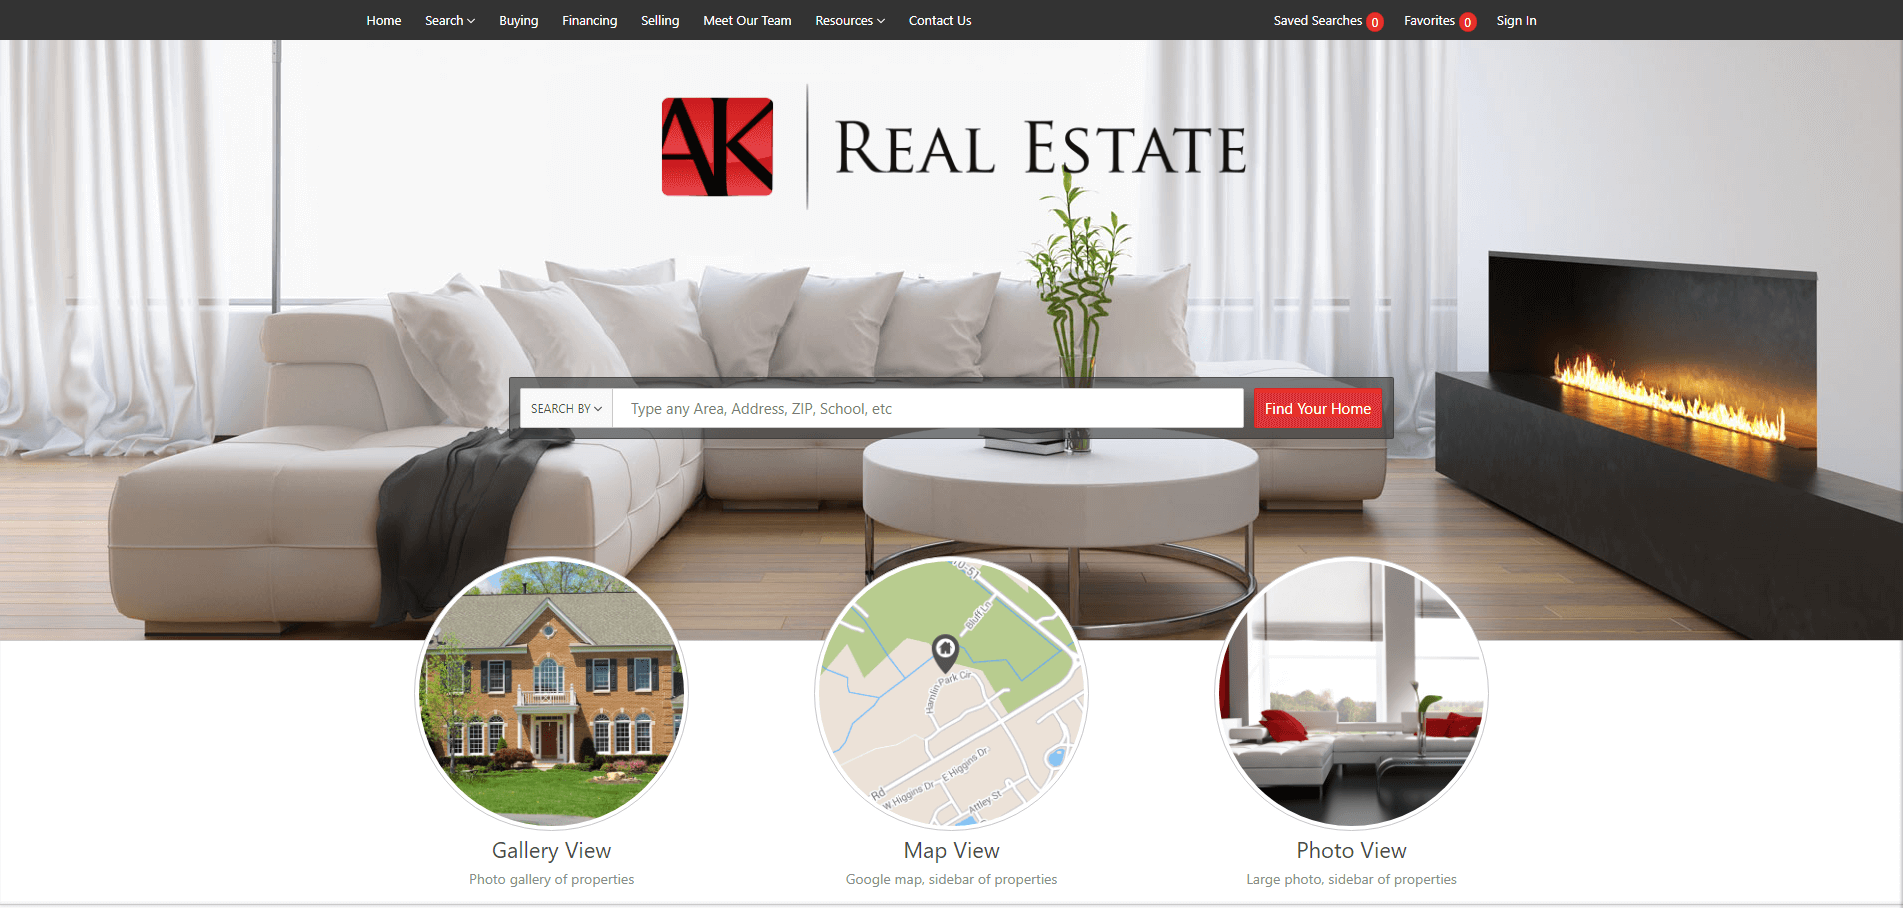  Crazy!  This is a list of the 101 best real estate websites.  We reviewed each site and ranked them 1-101.  Here's a-krealestate.com.  Who made the list? 